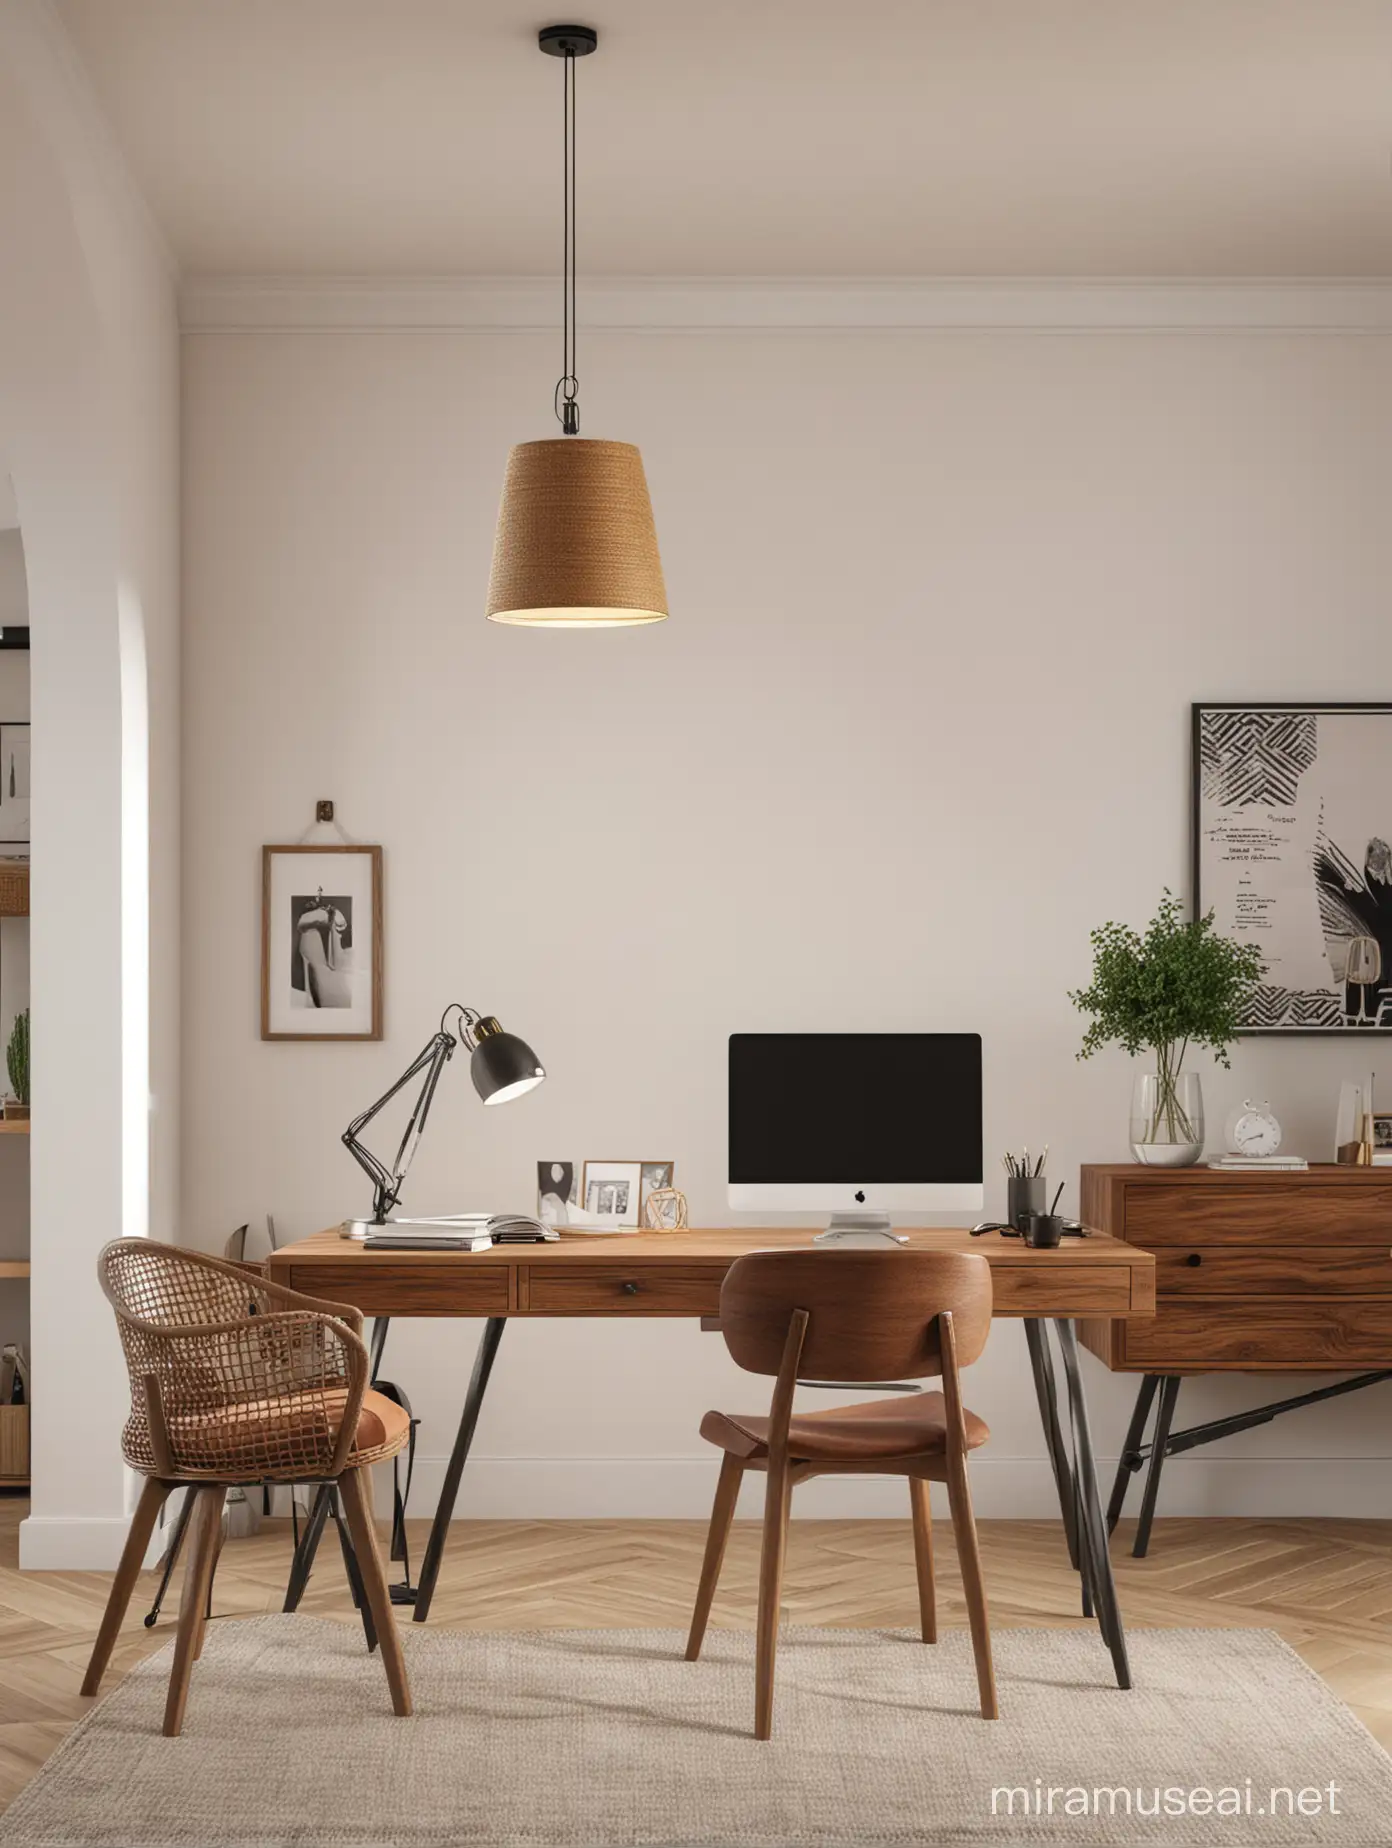 generate visualisation of home office in modern, minimalistic, andalusian style with andalusian accents, modern pendant lamp,modern desk lamp